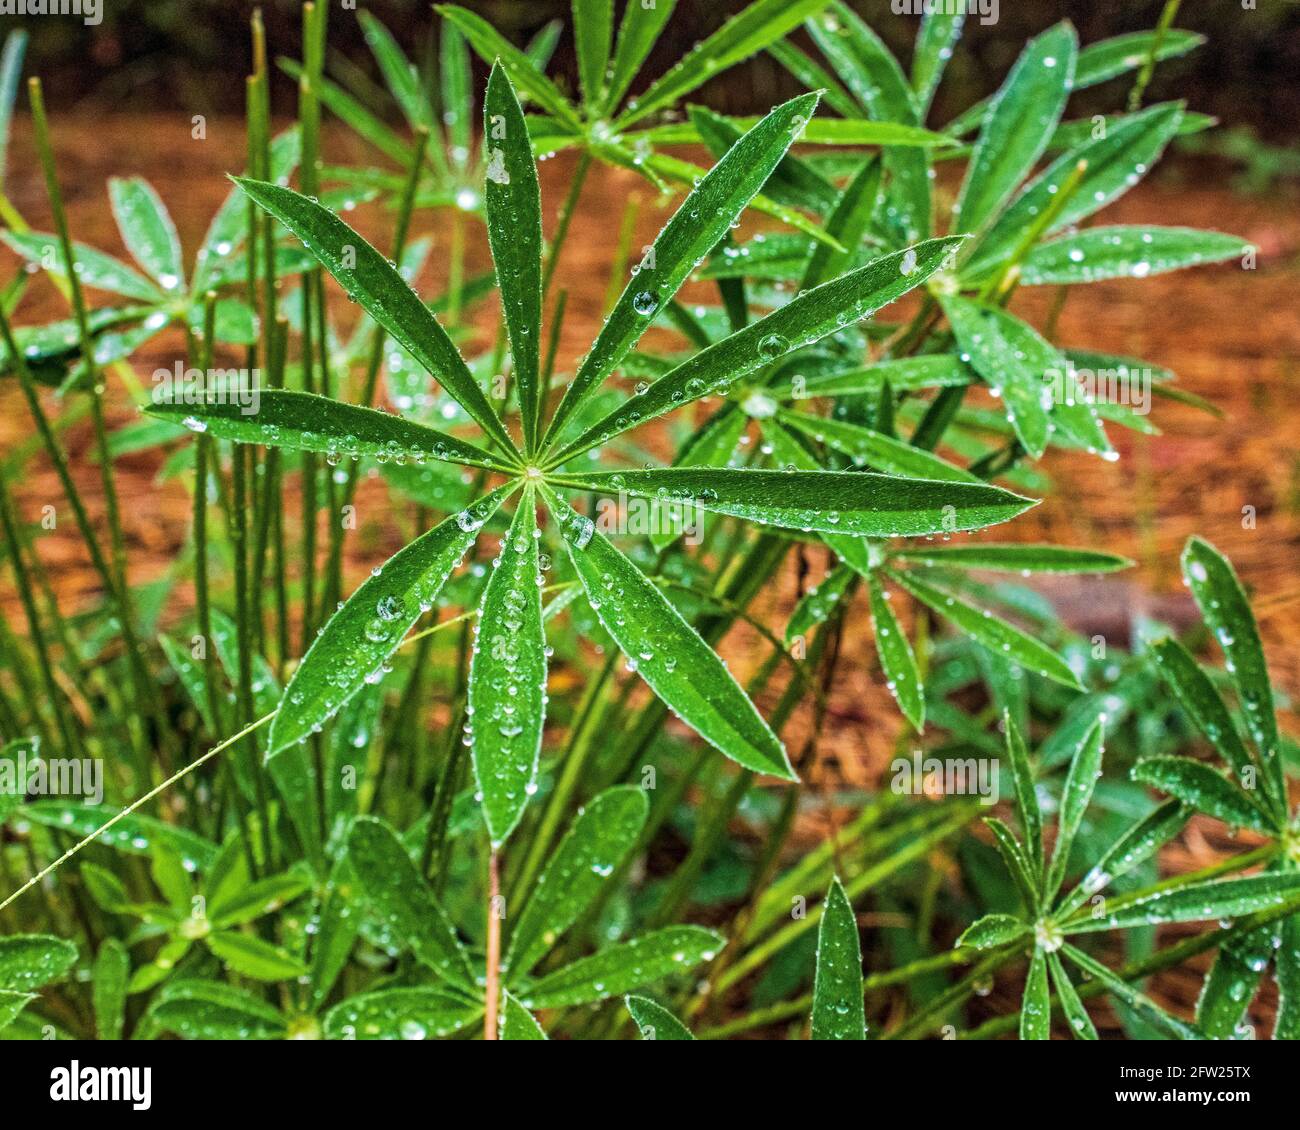 Rain drops sitting on the leaves of a wild plant in the forest Stock Photo